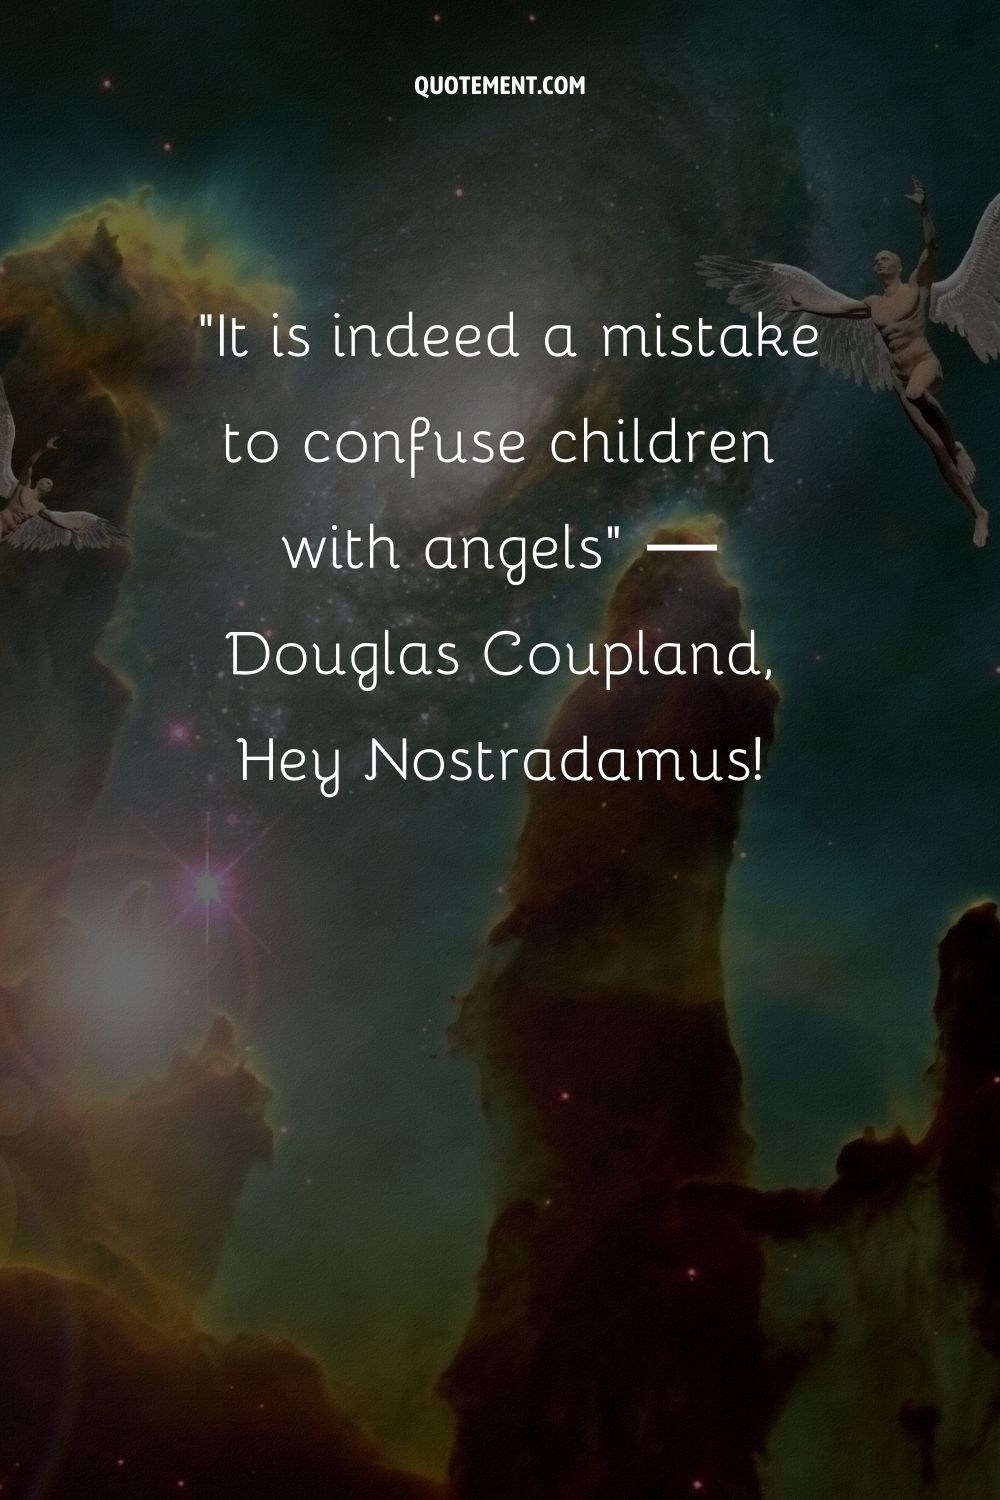 It is indeed a mistake to confuse children with angels